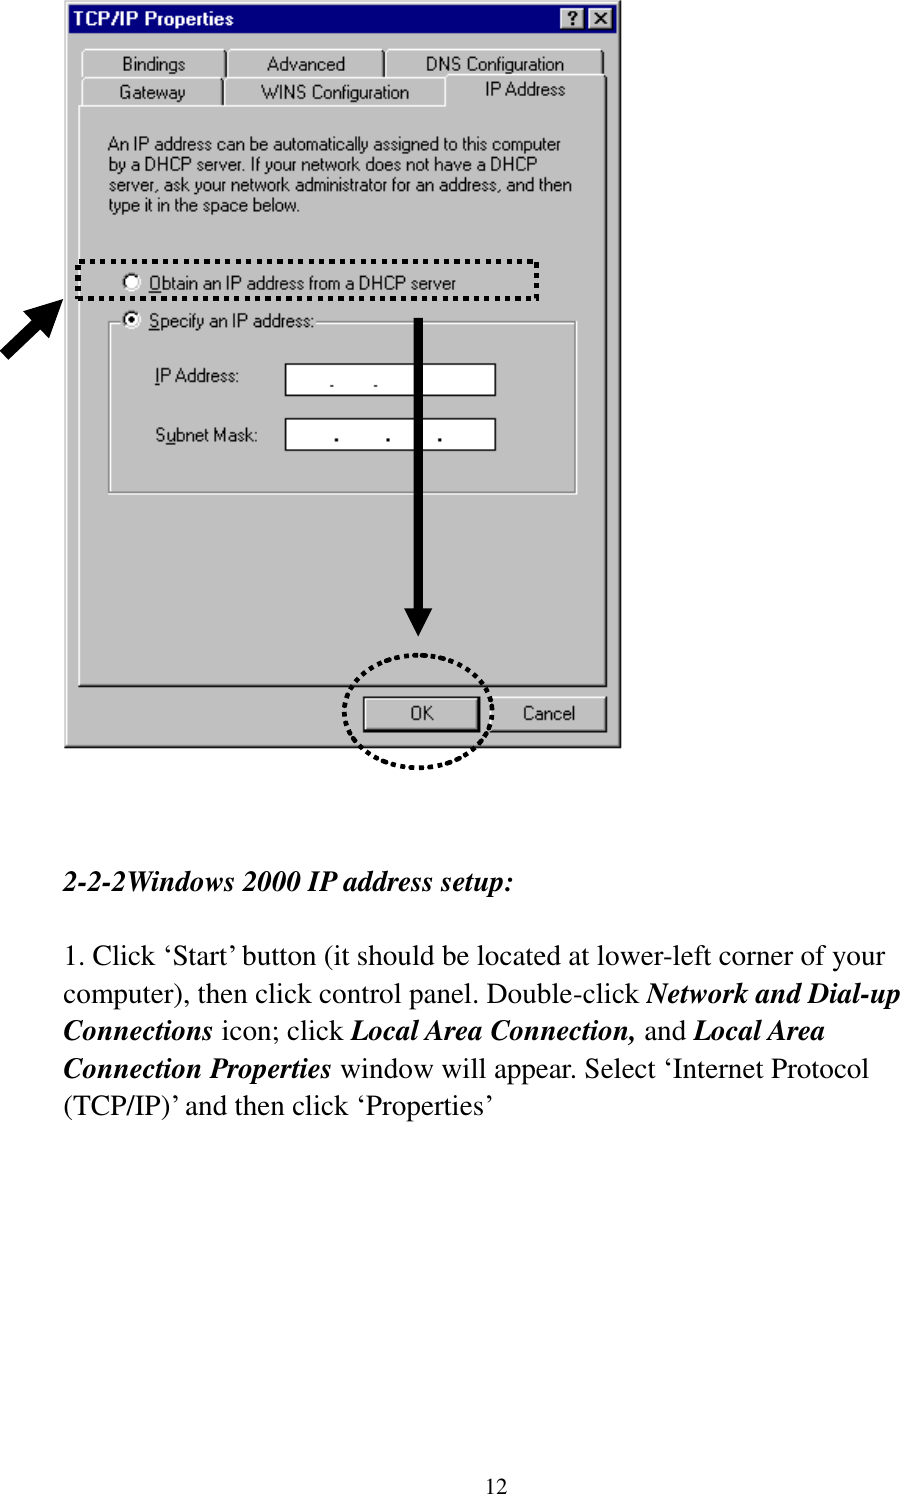 12     2-2-2Windows 2000 IP address setup:  1. Click „Start‟ button (it should be located at lower-left corner of your computer), then click control panel. Double-click Network and Dial-up Connections icon; click Local Area Connection, and Local Area Connection Properties window will appear. Select „Internet Protocol (TCP/IP)‟ and then click „Properties‟    